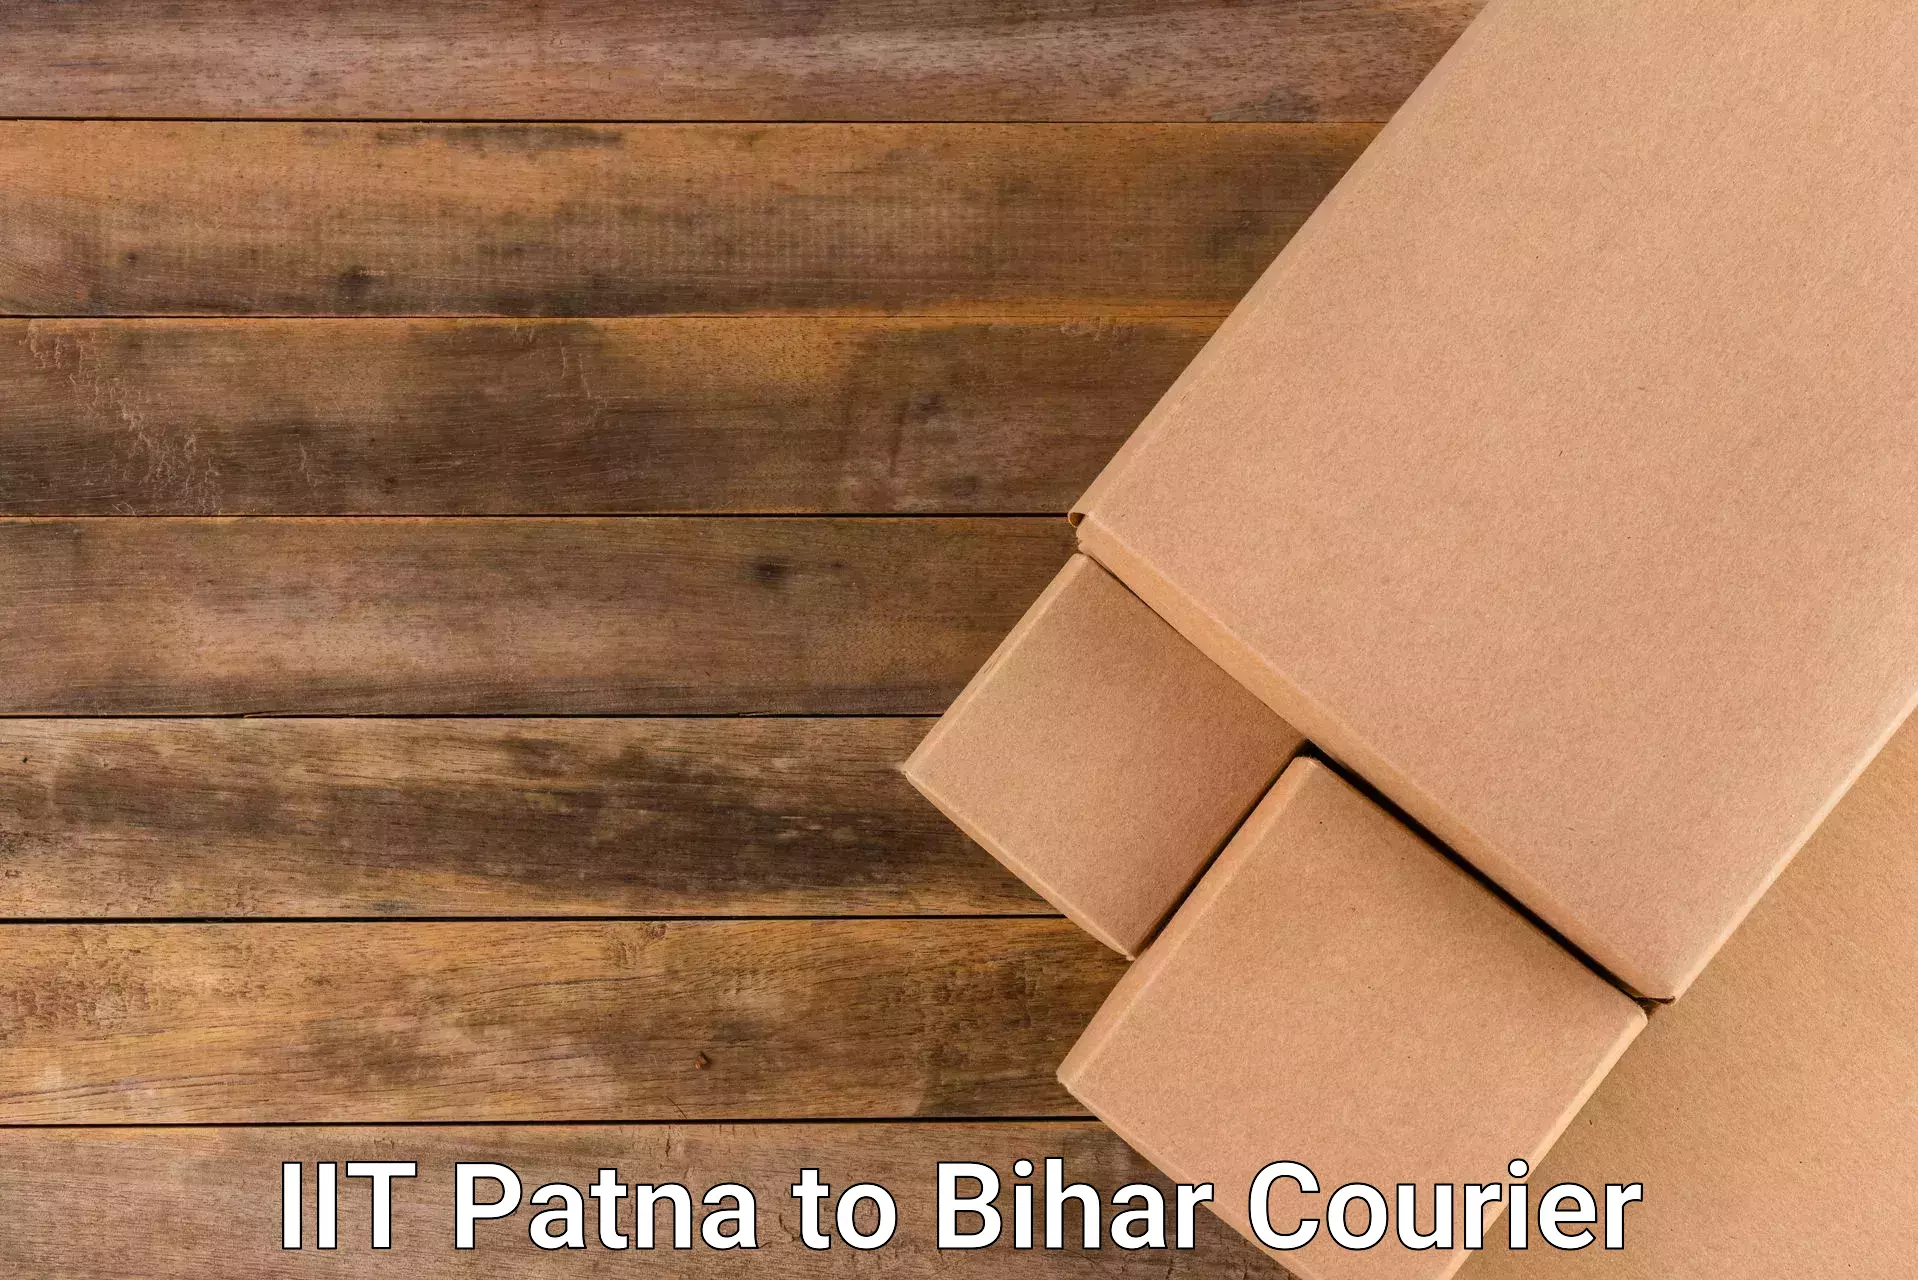 Express delivery capabilities IIT Patna to Katoria